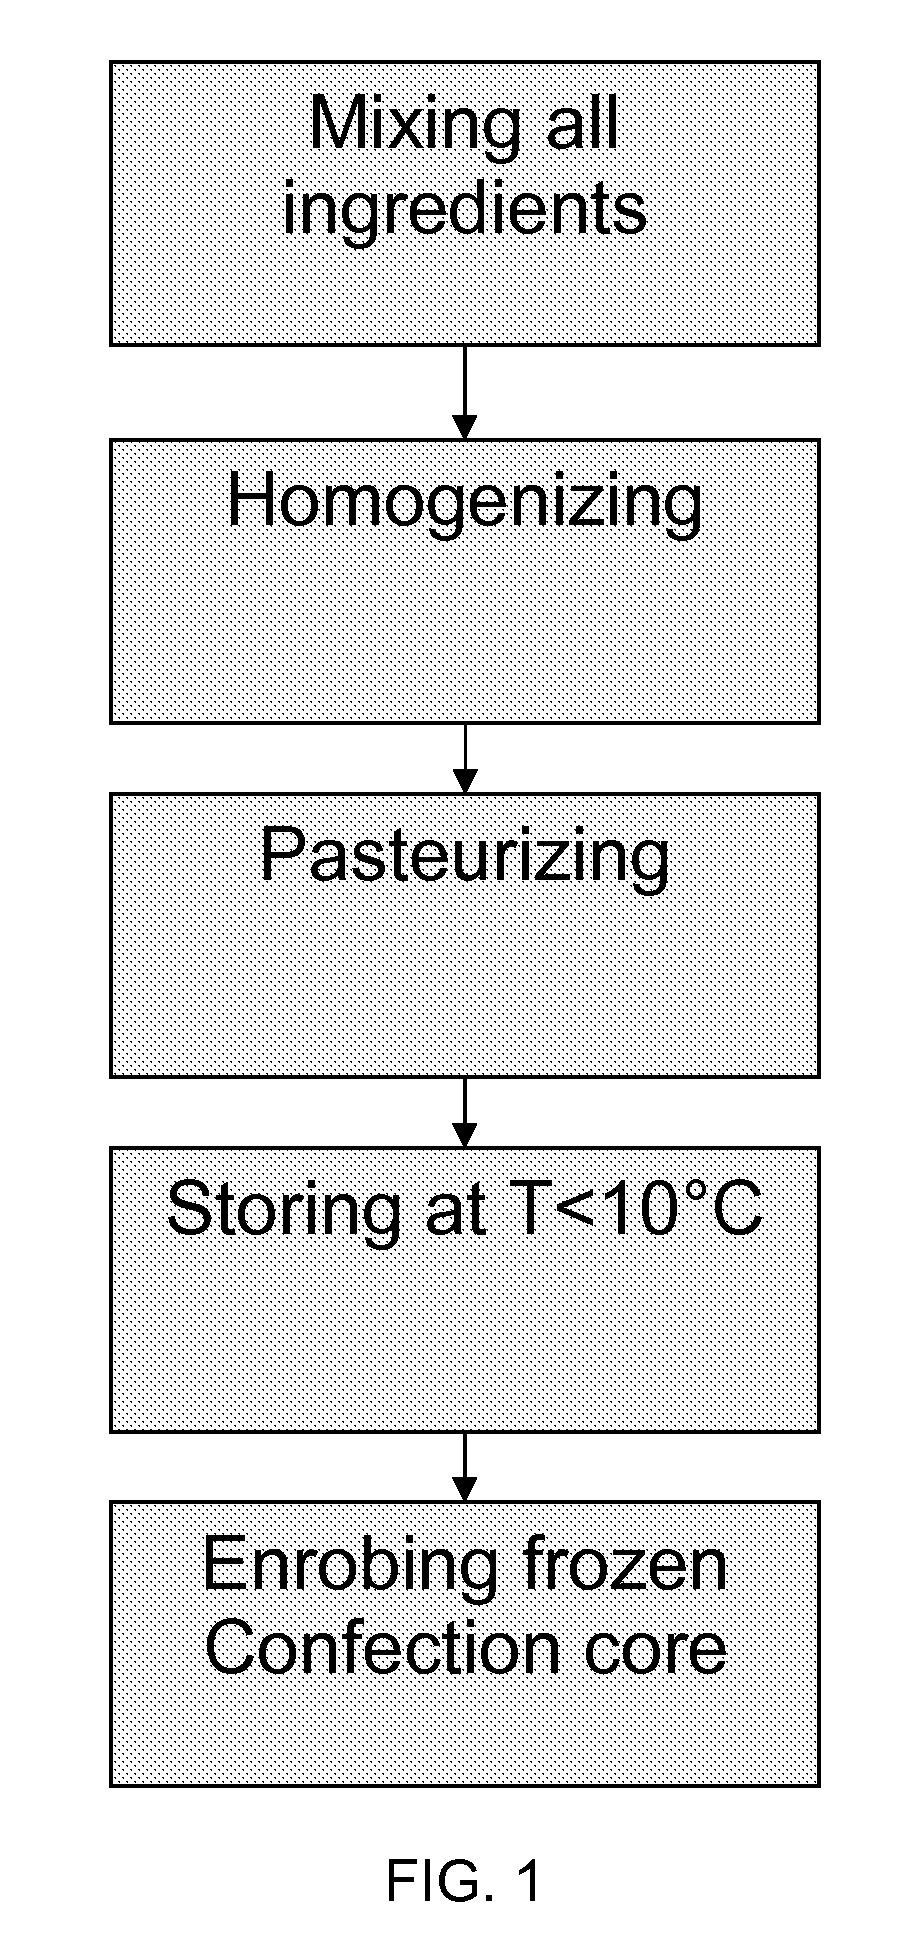 Water-based coating for frozen confection